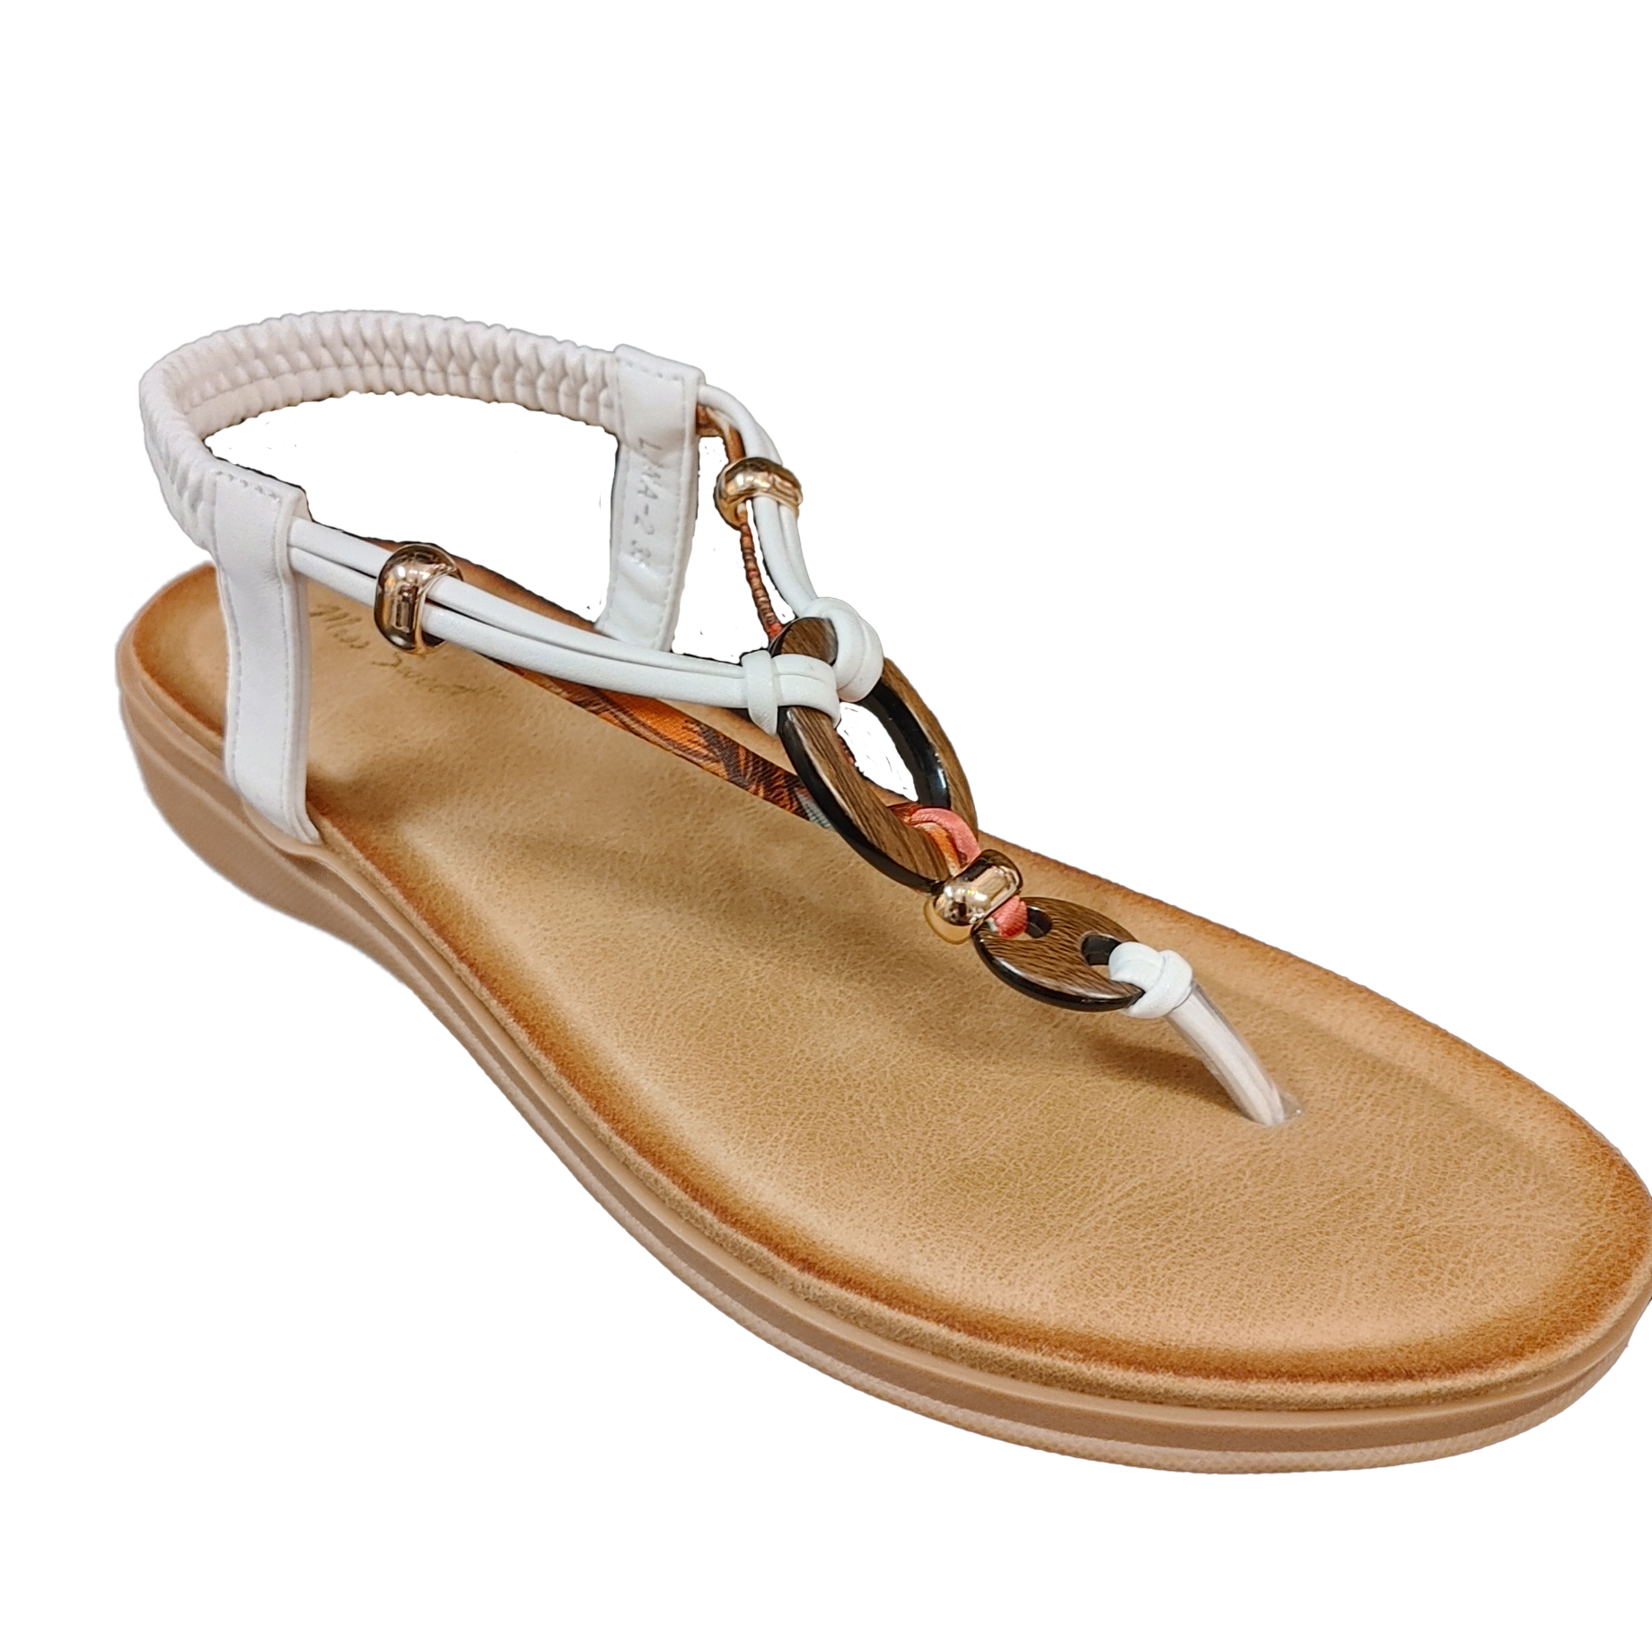 Miss Sweet Miss Sweet flat thong sandal with beads and wood detail